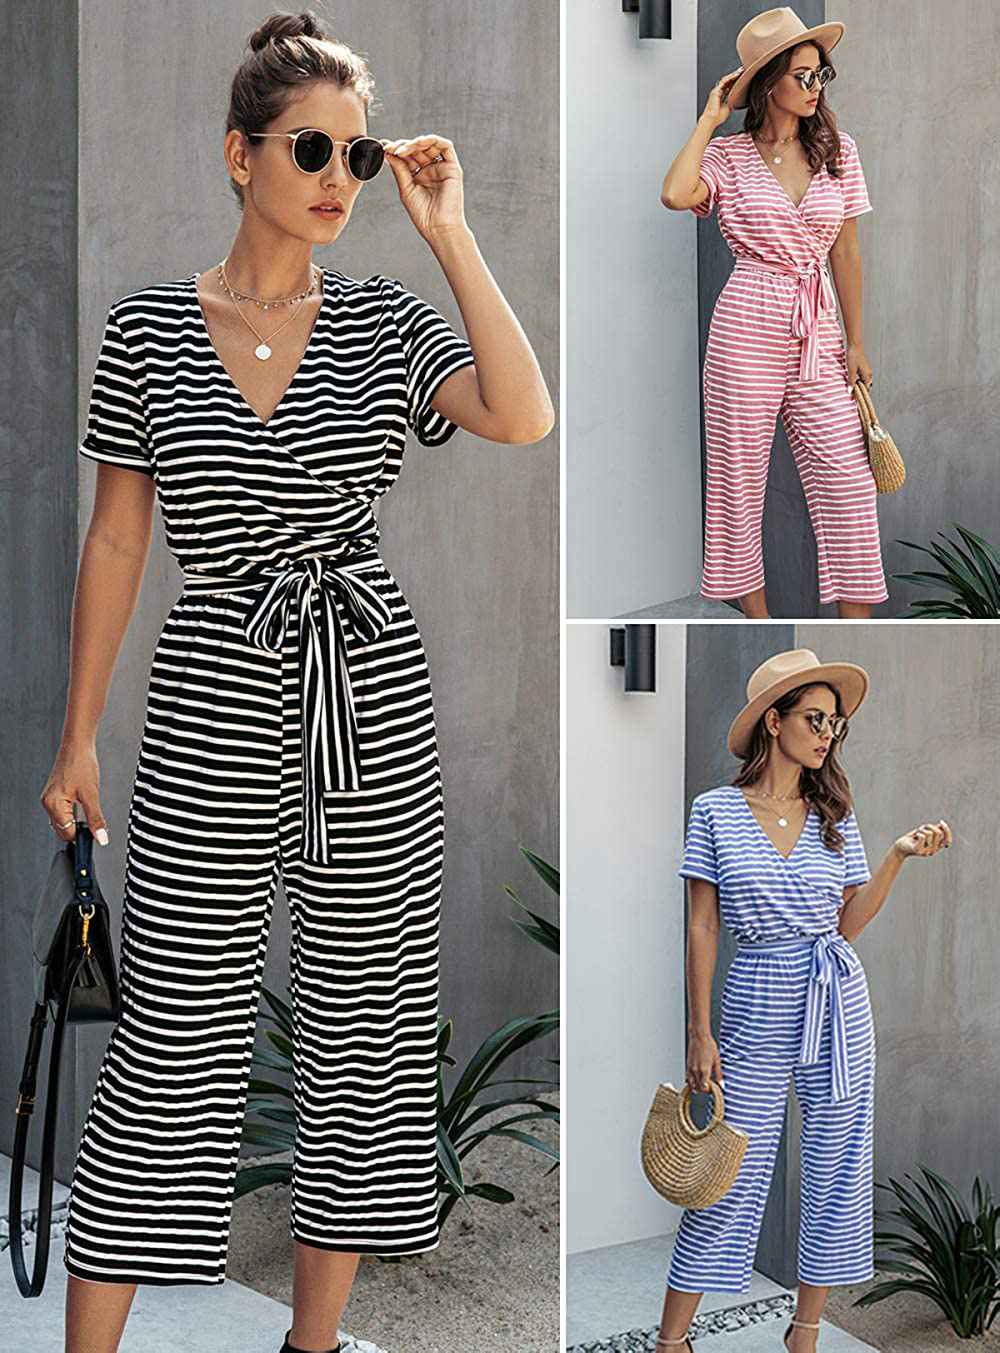 PRETTYGARDEN Striped Jumpsuit Will Be Your Spring Uniform | UsWeekly